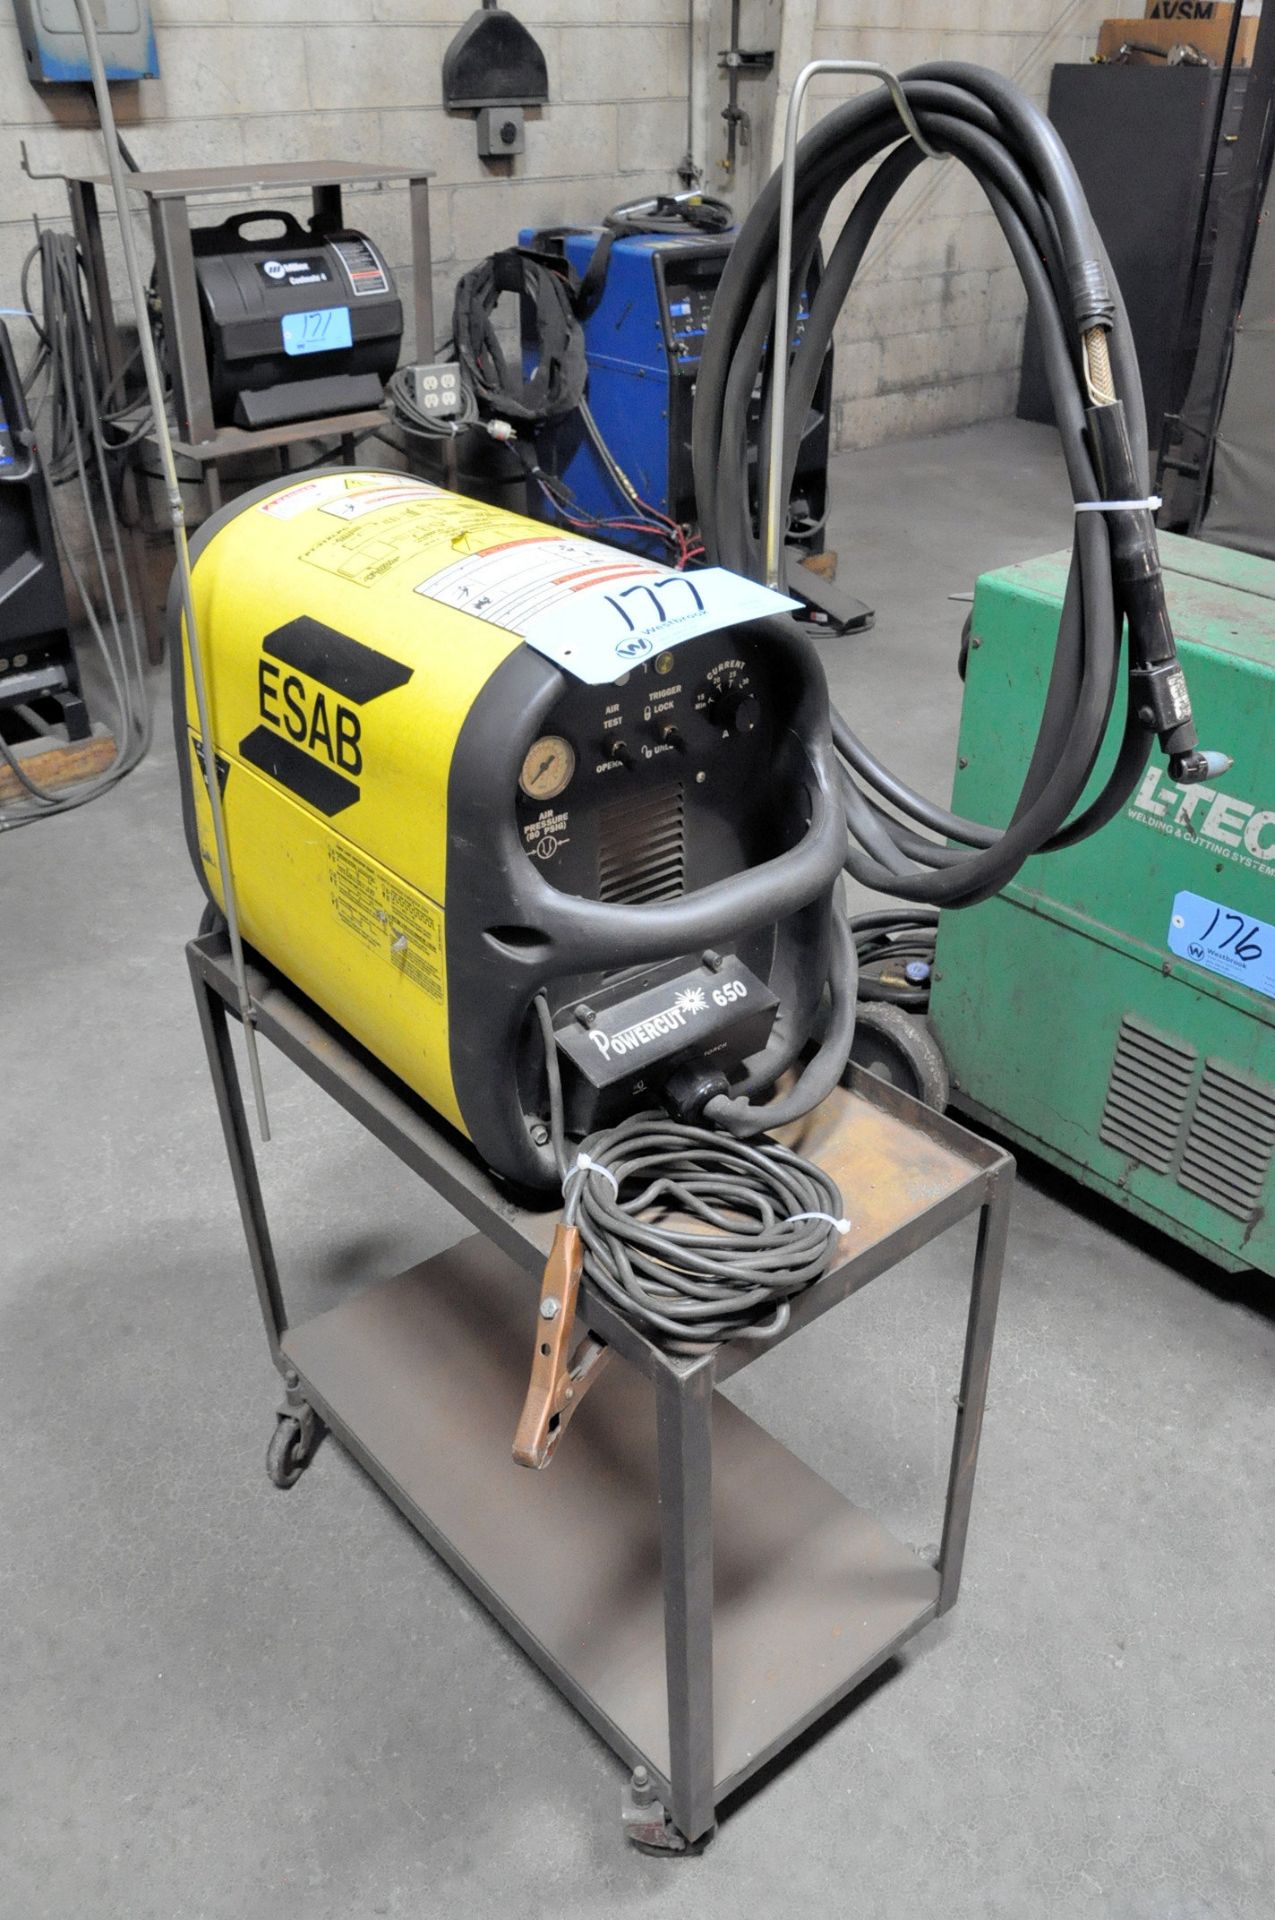 Esab Powercut 650, Portable Plasma Cutting System, with Leads and Cart - Image 2 of 4